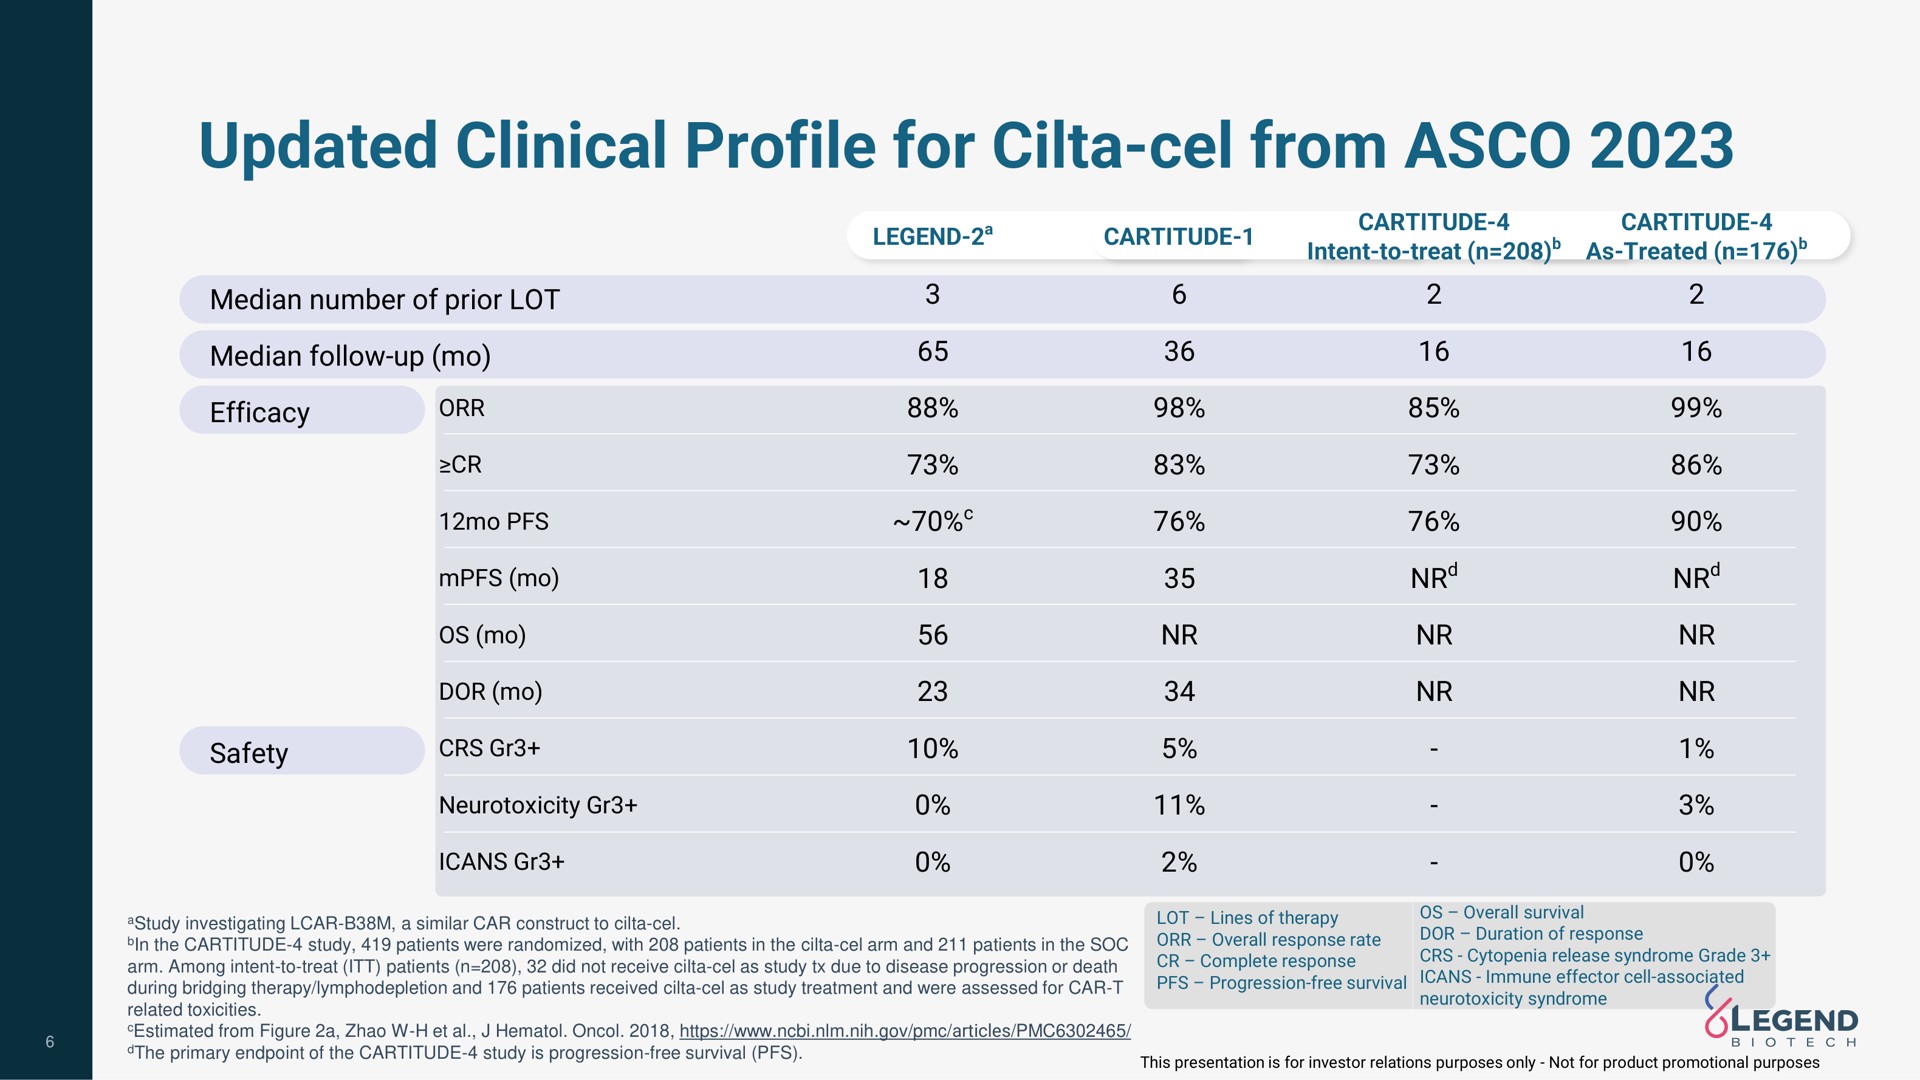 updated clinical profile for from legend to treat as treated | Legend Biotech